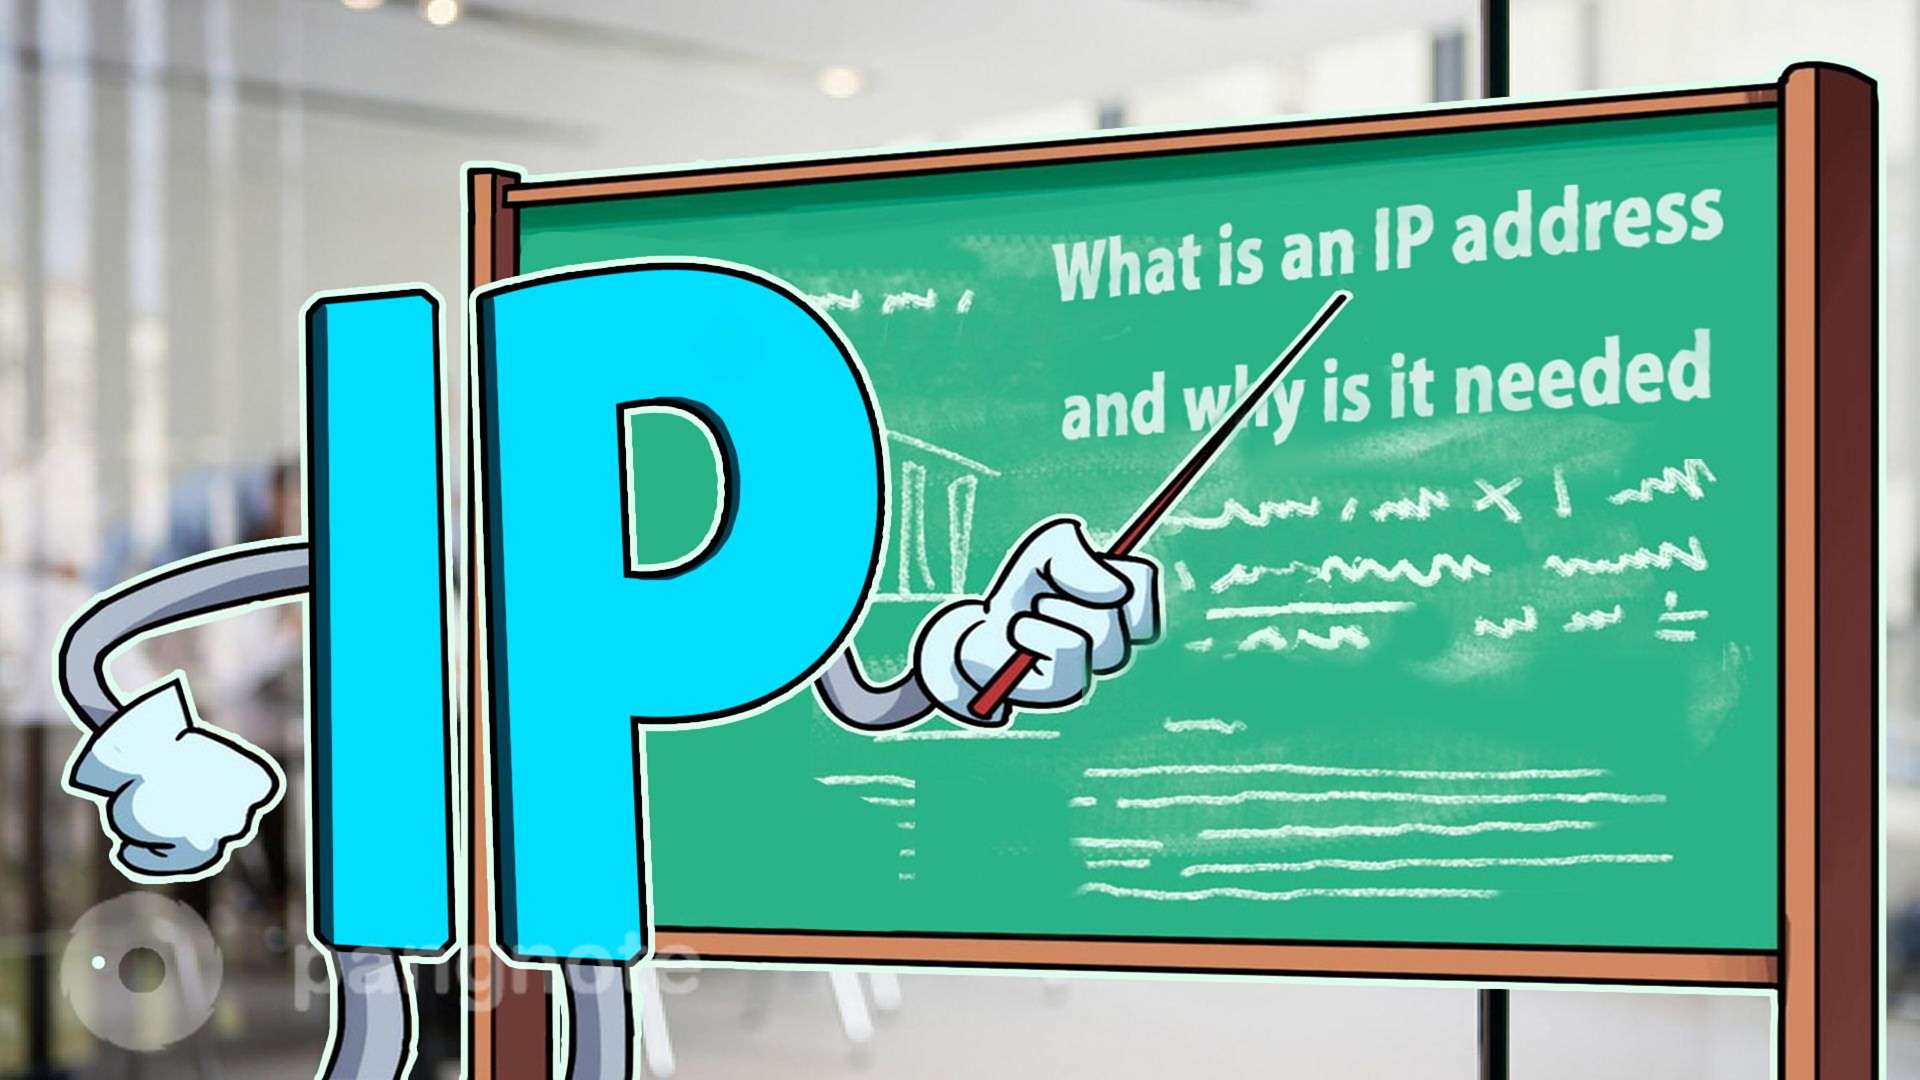 What is an IP address and why is it needed?